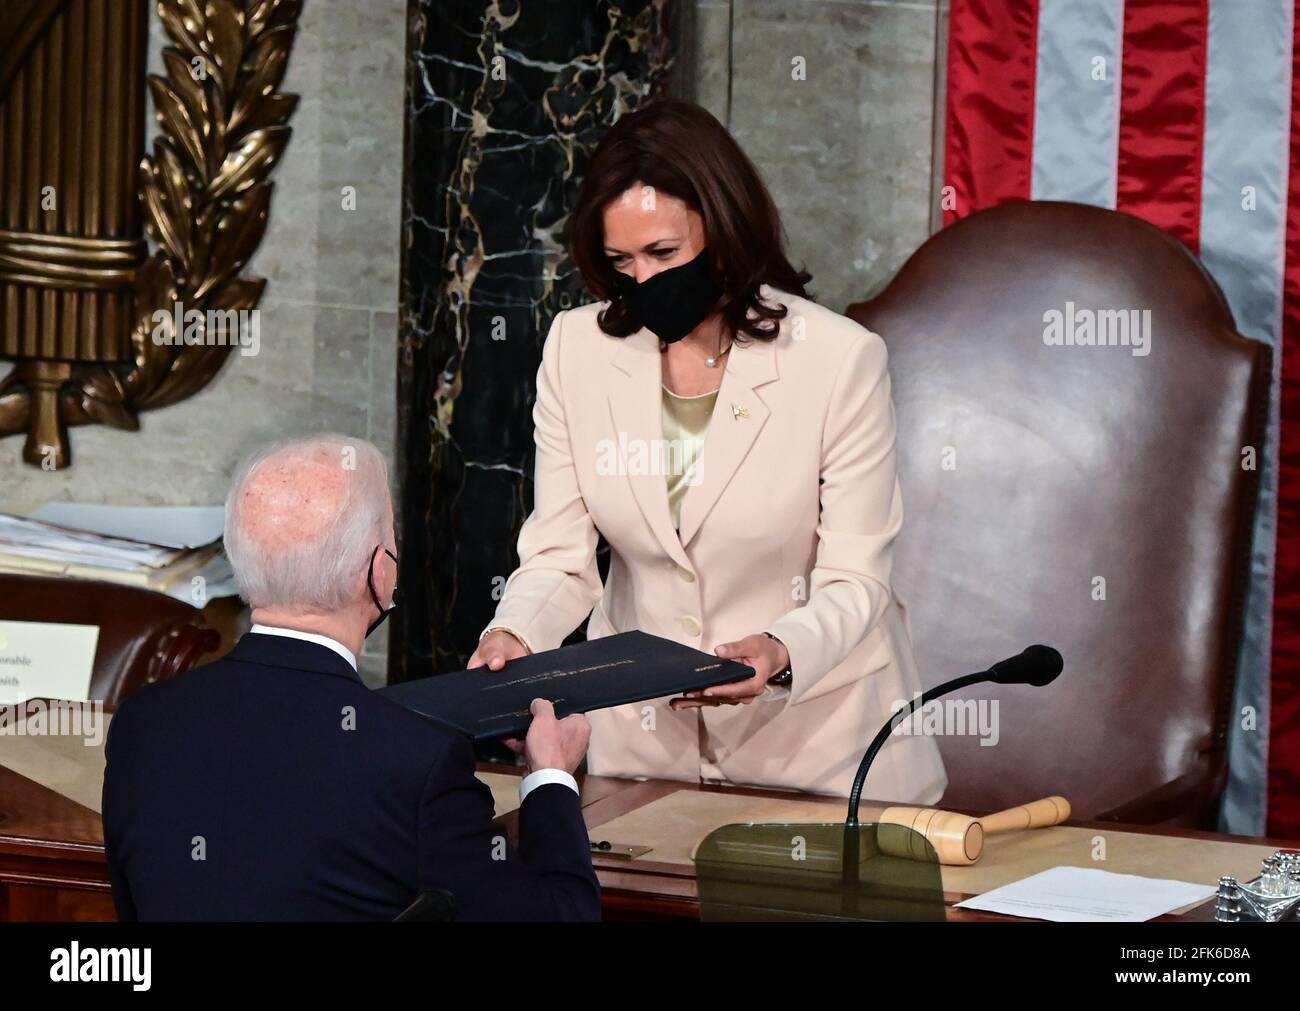 US President Joe Biden gives a copy of his speech to US Vice President Kamala Harris as he arrives to addresses a joint session of Congress at the US Capitol in Washington, DC, on April 28, 2021. Credit: Jim Watson/Pool via CNP /MediaPunch Stock Photo